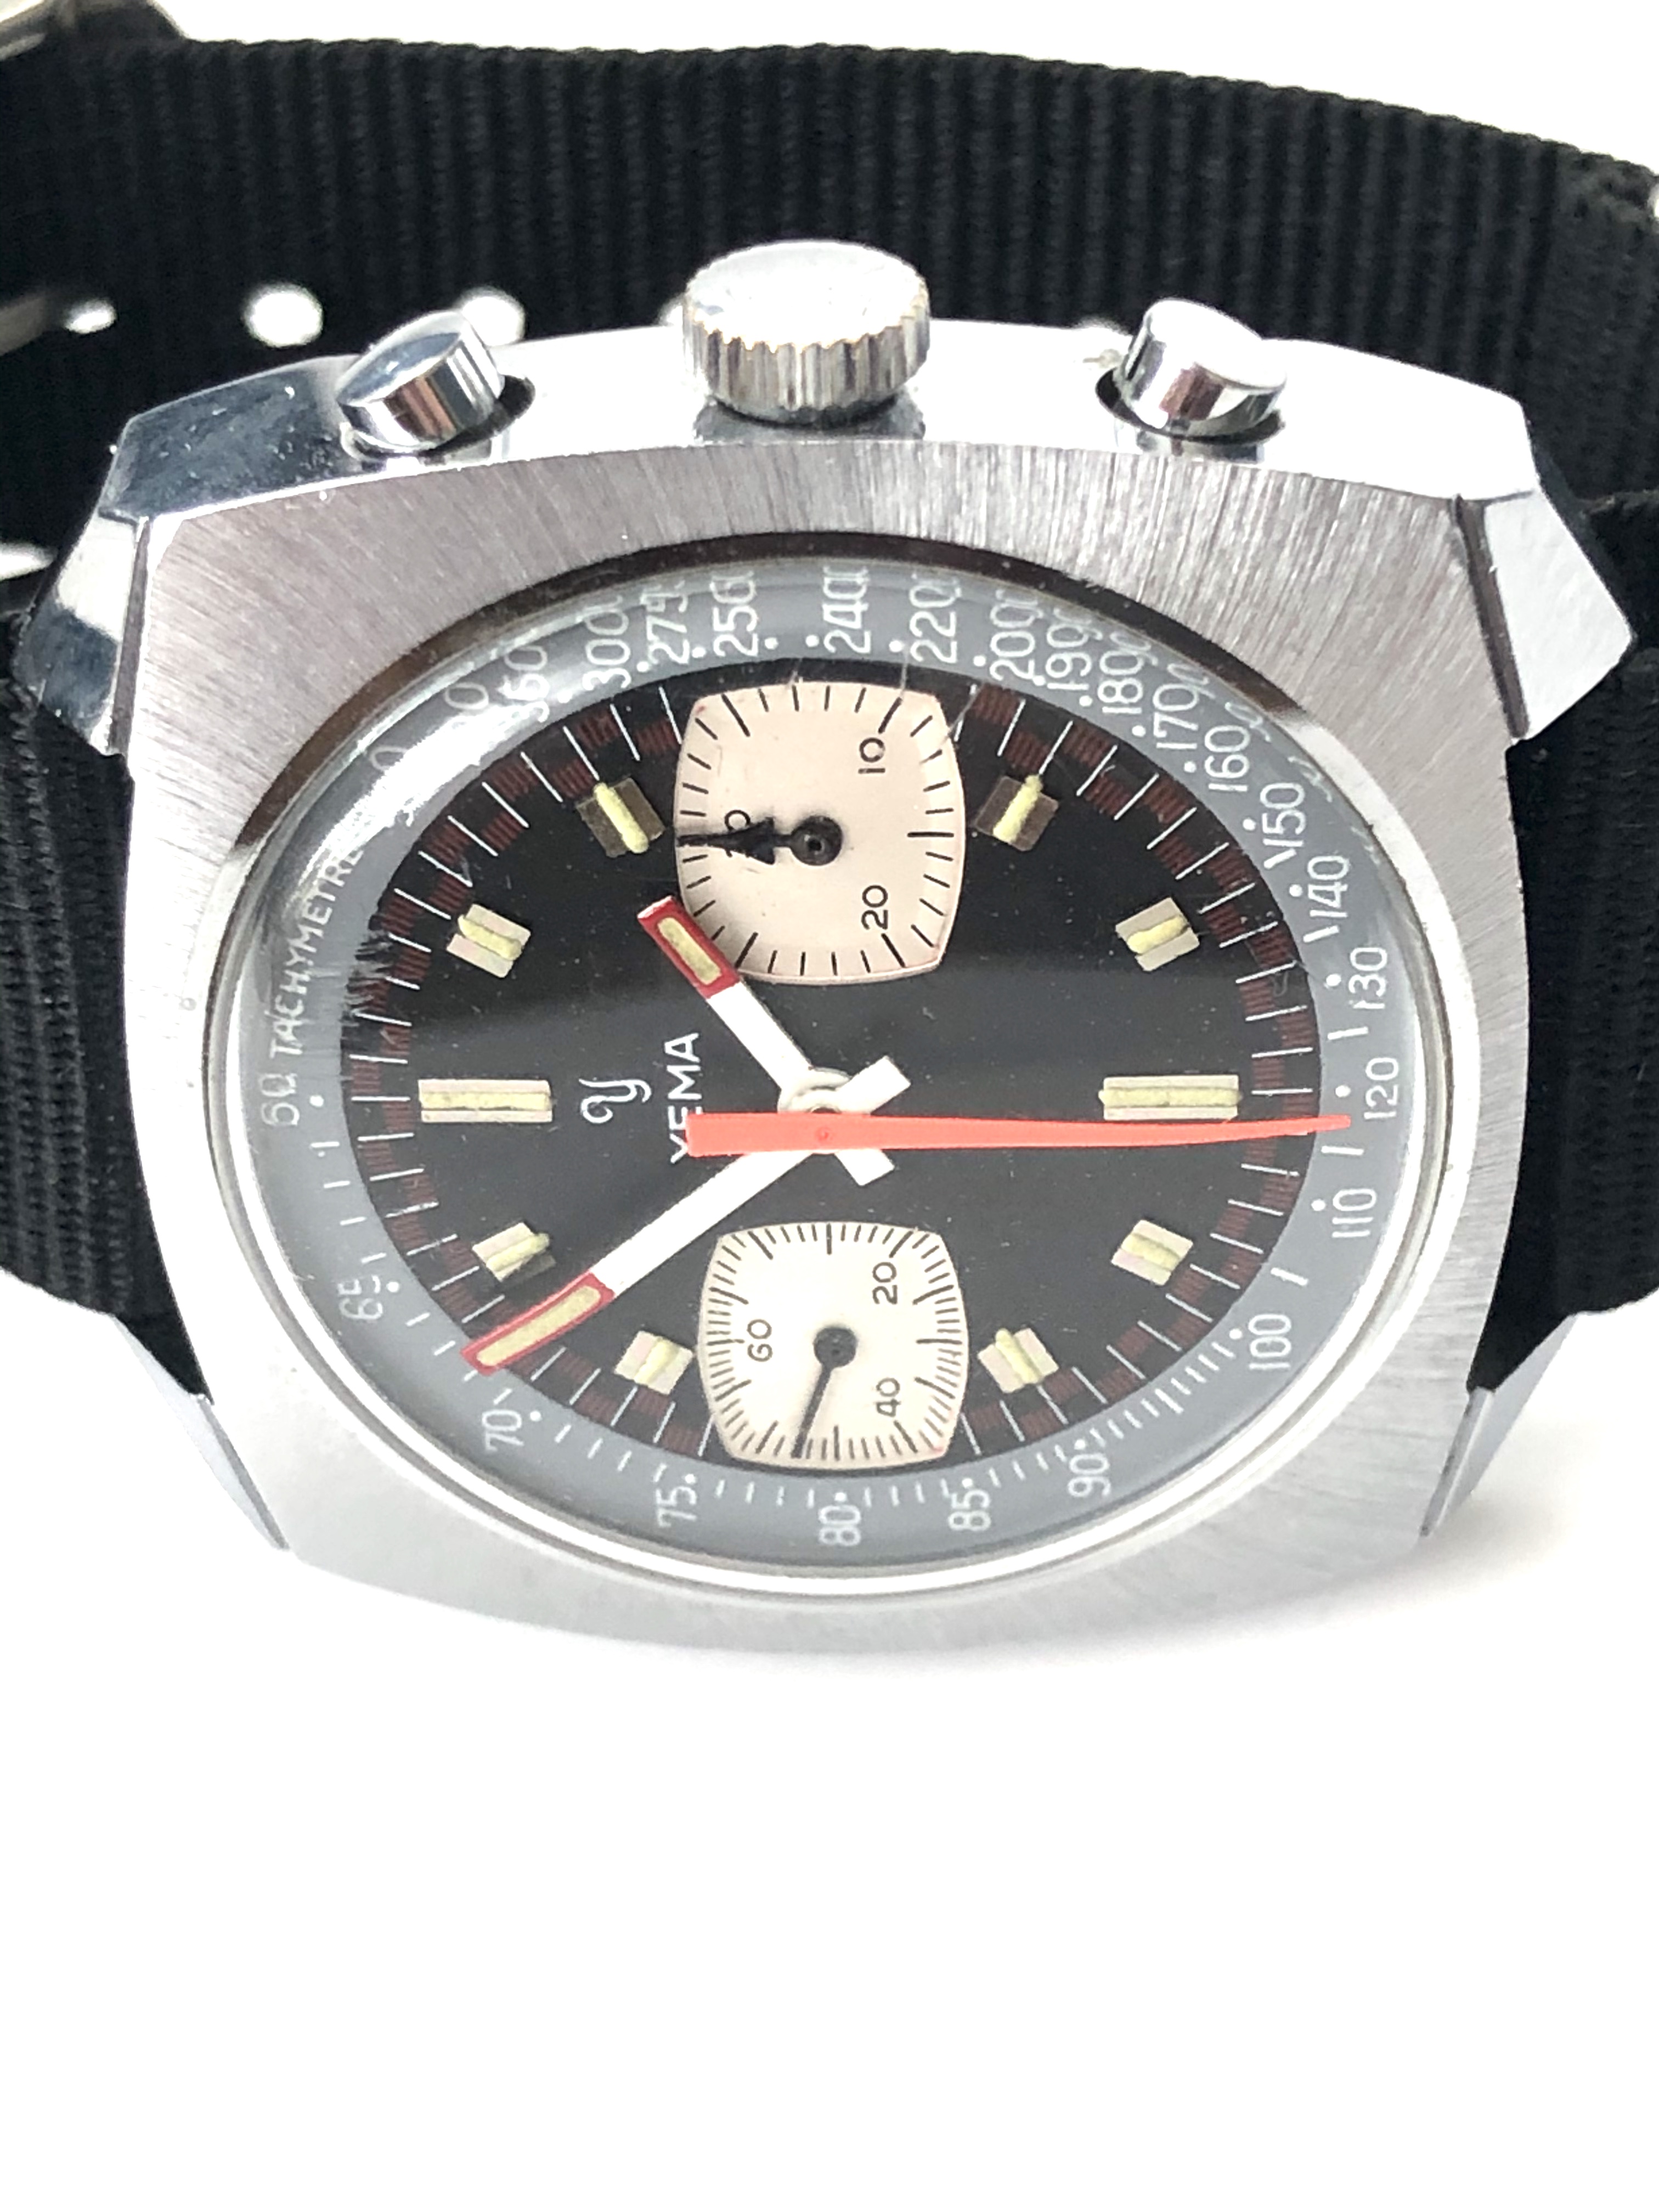 A Rare Find Vintage Yema Panda Dial Chronograph In Amazing Condition - Image 11 of 11